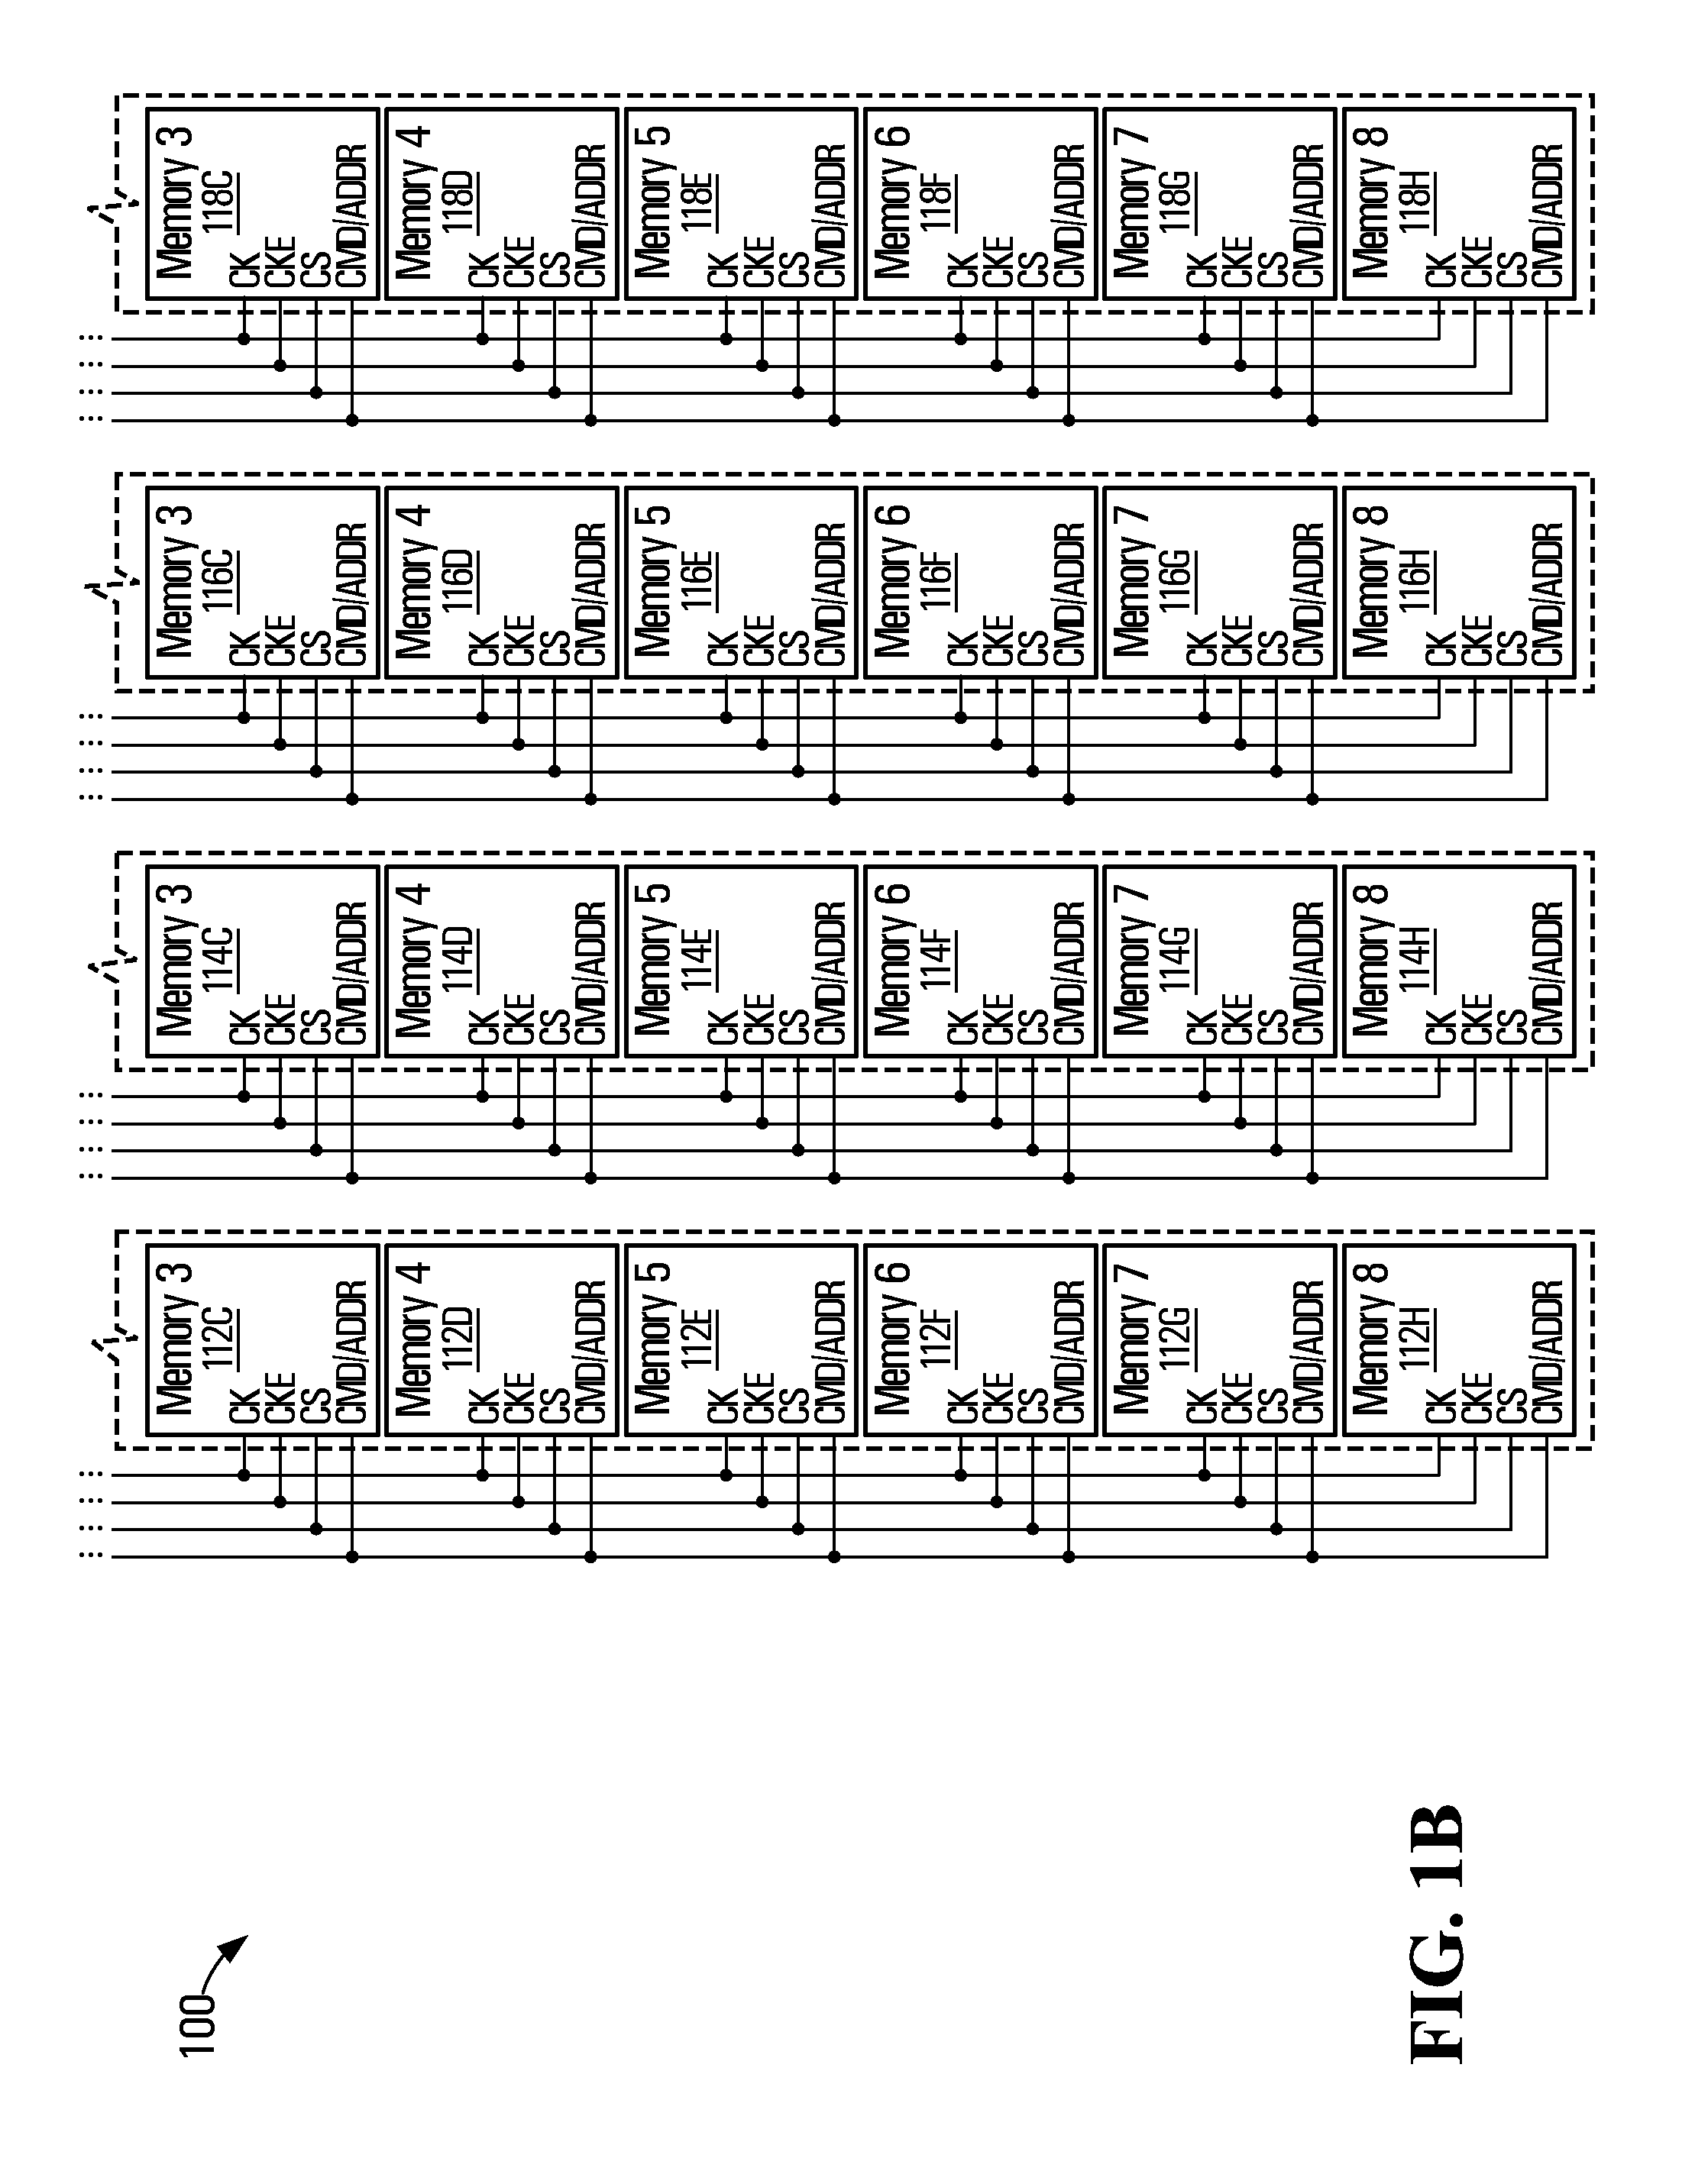 Clock generation for synchronous circuits with slow settling control signals